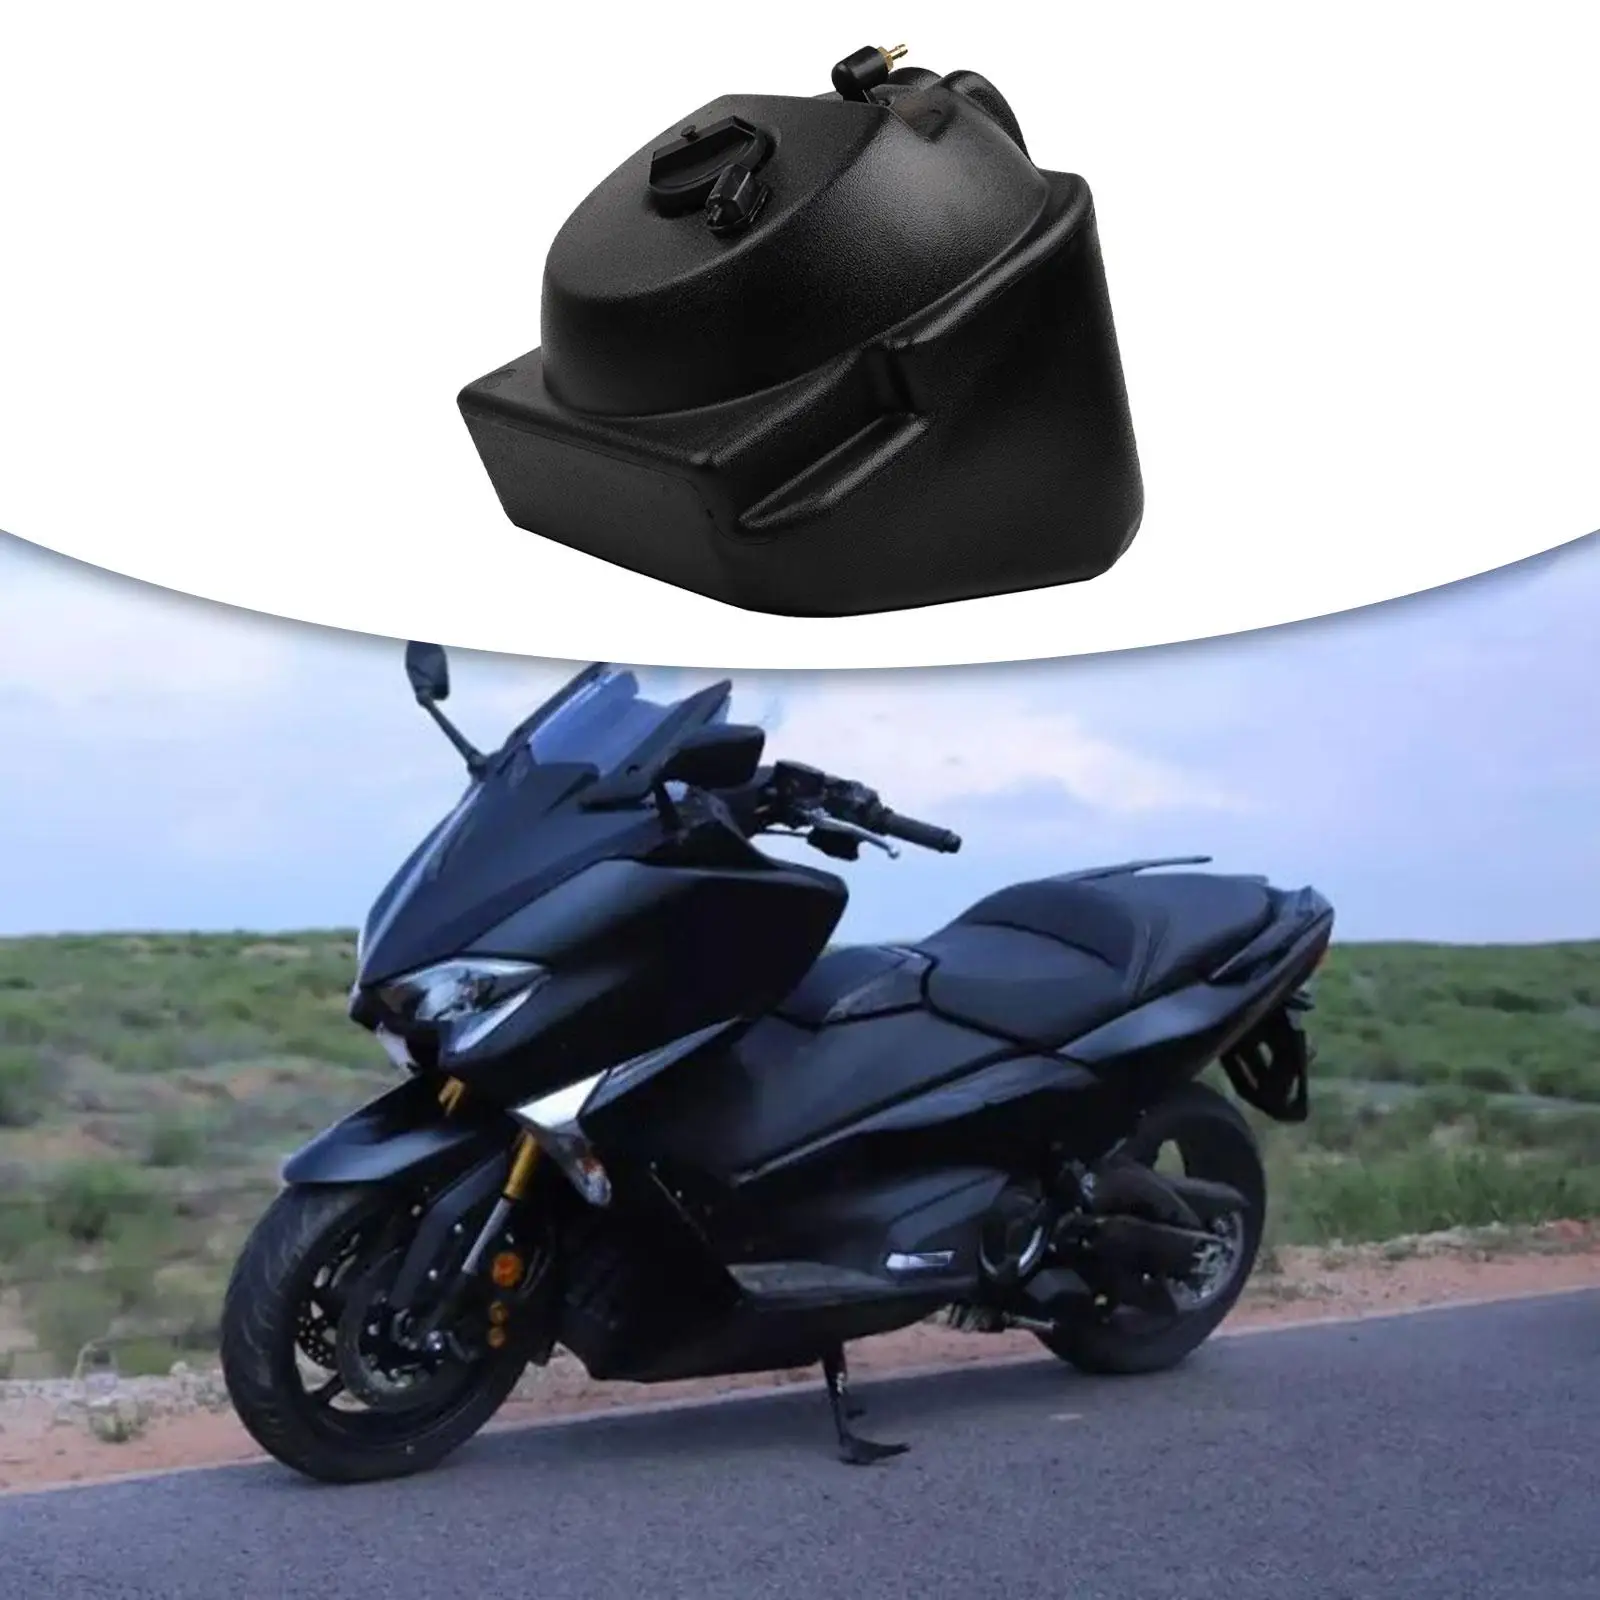 Auxiliary Fuel Tank Oil Tank Fuel Tank Oil Box for Yamaha Tmax560